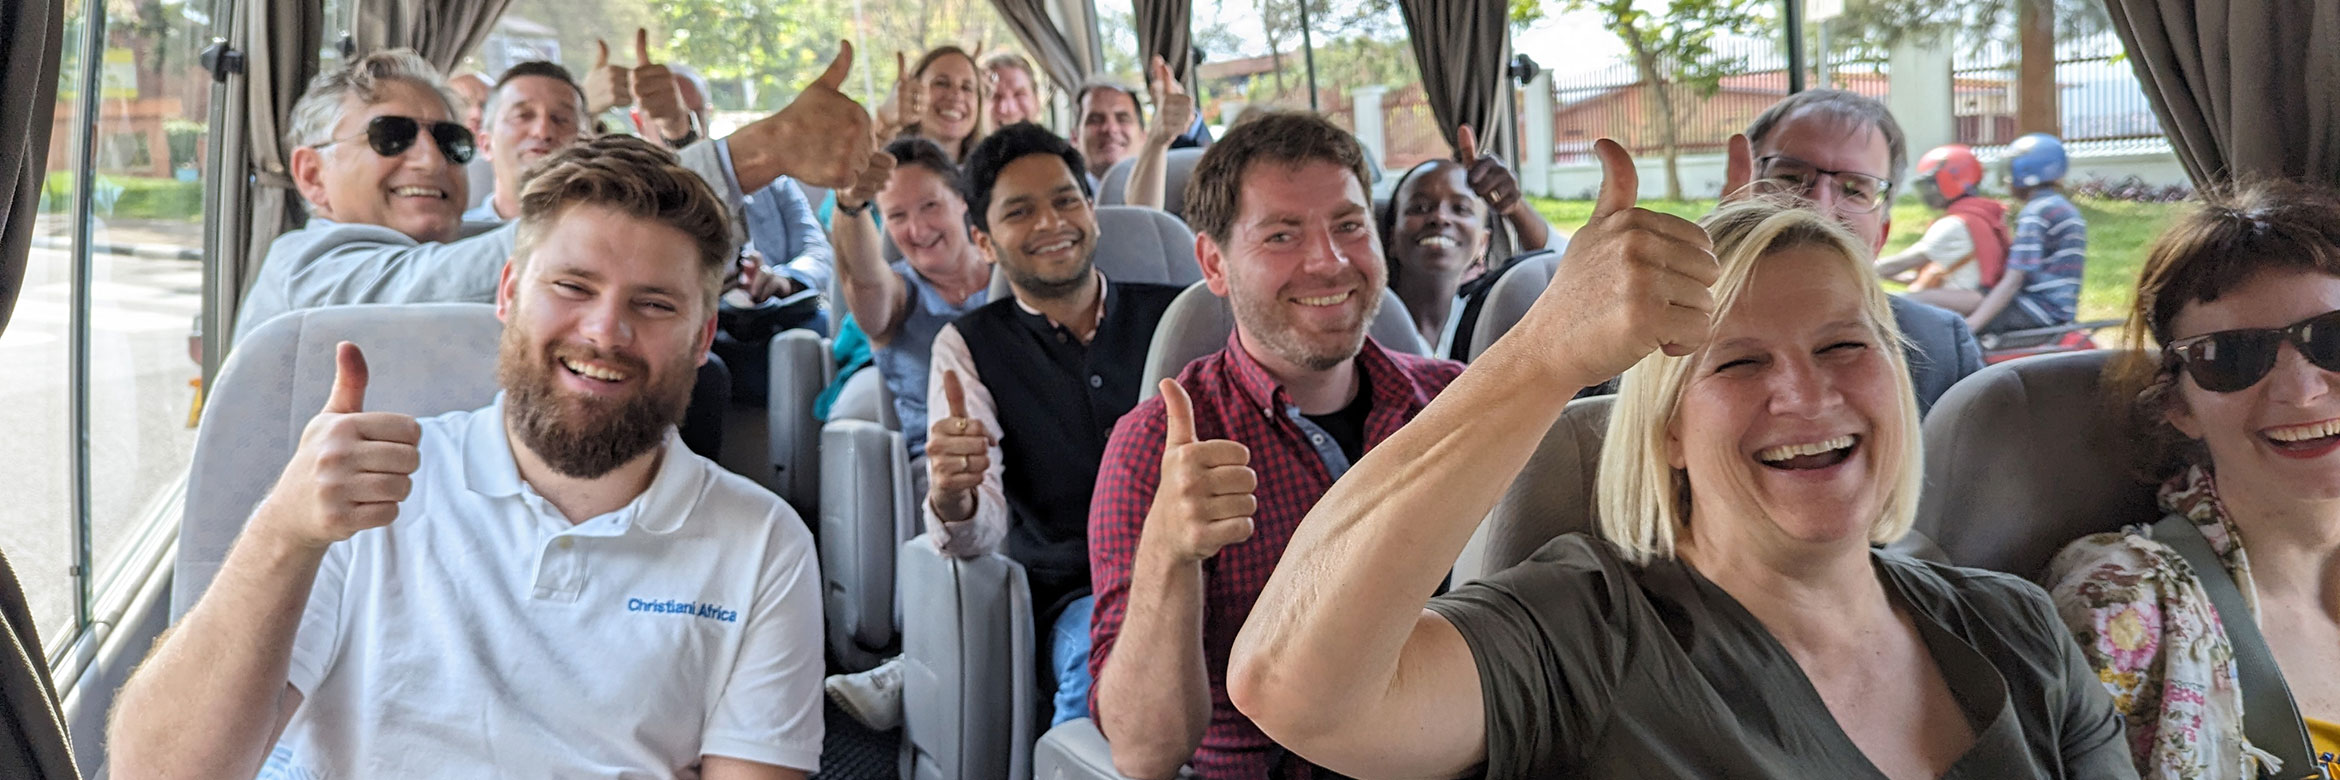 people on a bus raise their hands with their thumbs up